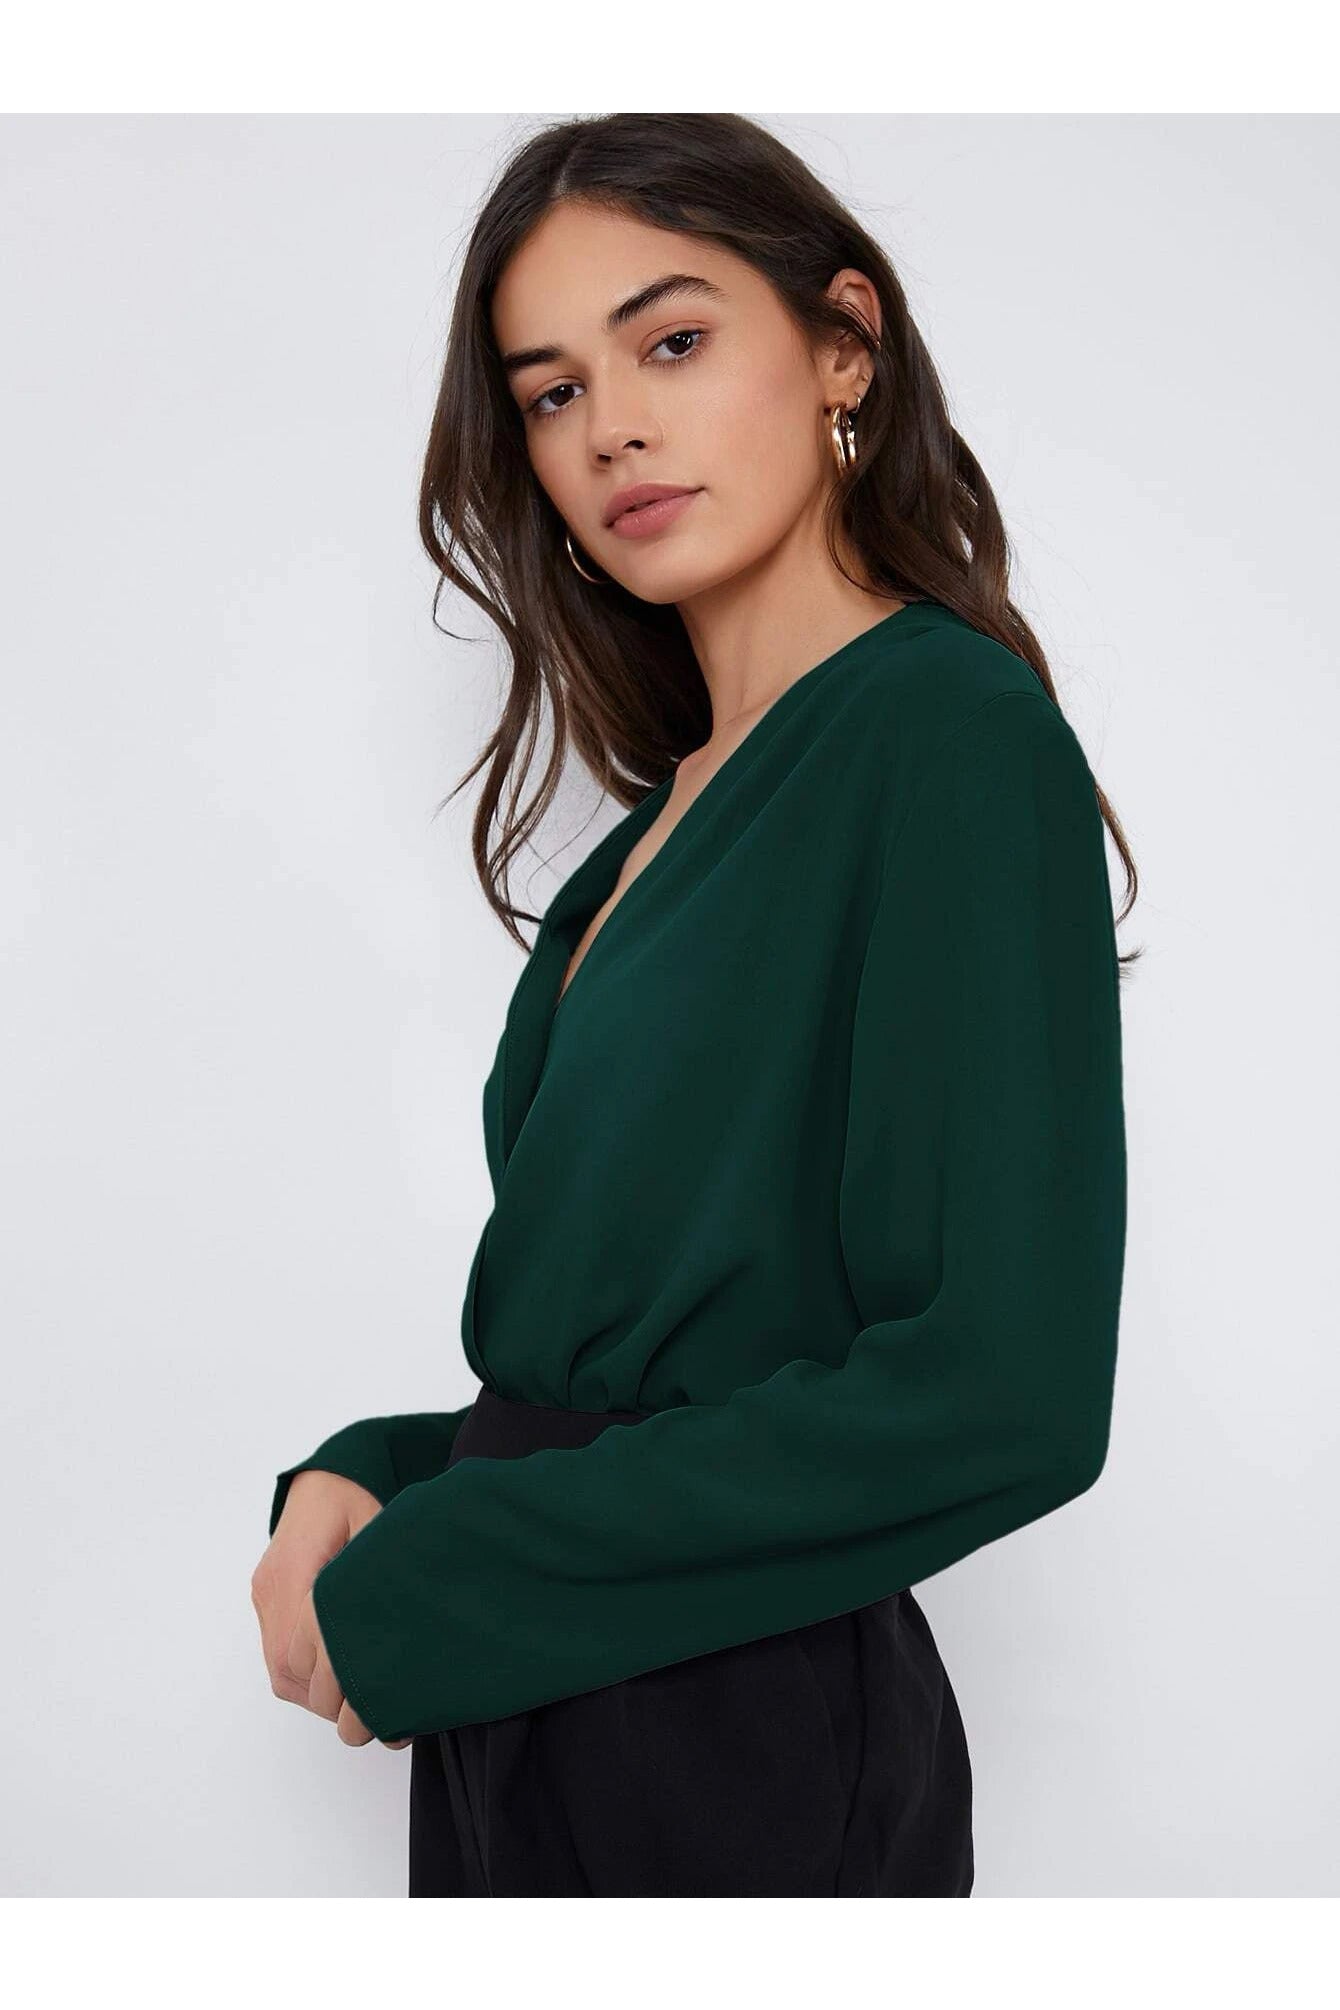 Buy Shein Fold Pleated Solid Top in Pakistan